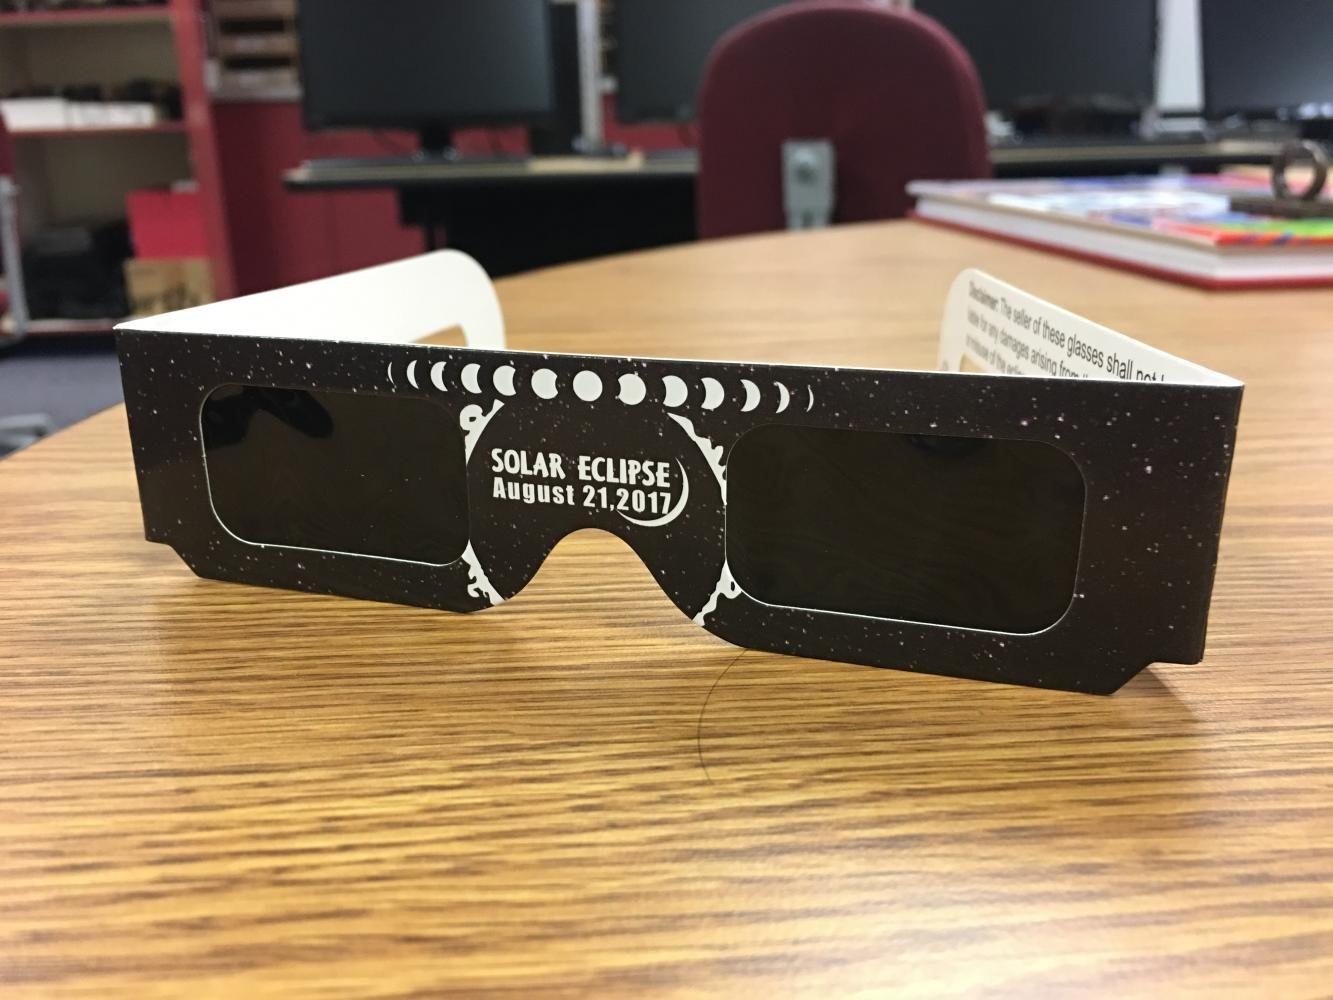 Special+solar+eclipse+glasses+will+be+provided+by+the+school.+Classes+will+be+taken+outside+to+view+the+eclipse+during+C+lunch.